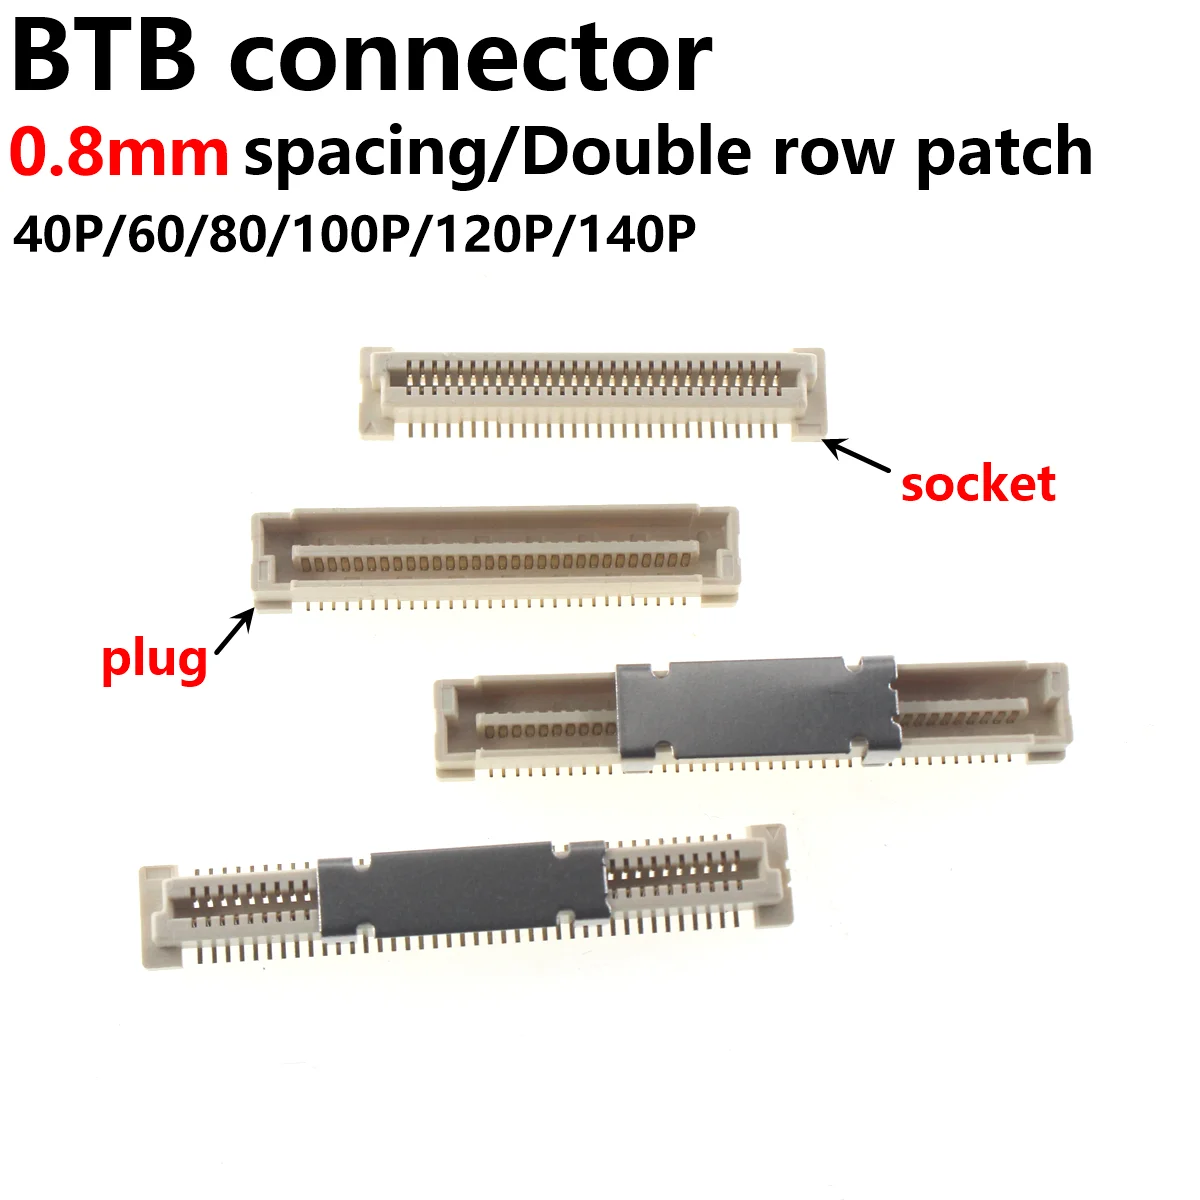 2SETS SOCKET AND PLUG 1SETS 0.8mm pitch board to double row patch BTB connector 40P/60/80/100P/120P/140P 7pin truck trailer light board extension cable connector adaptor cable socket wire part cable circuit socket plug